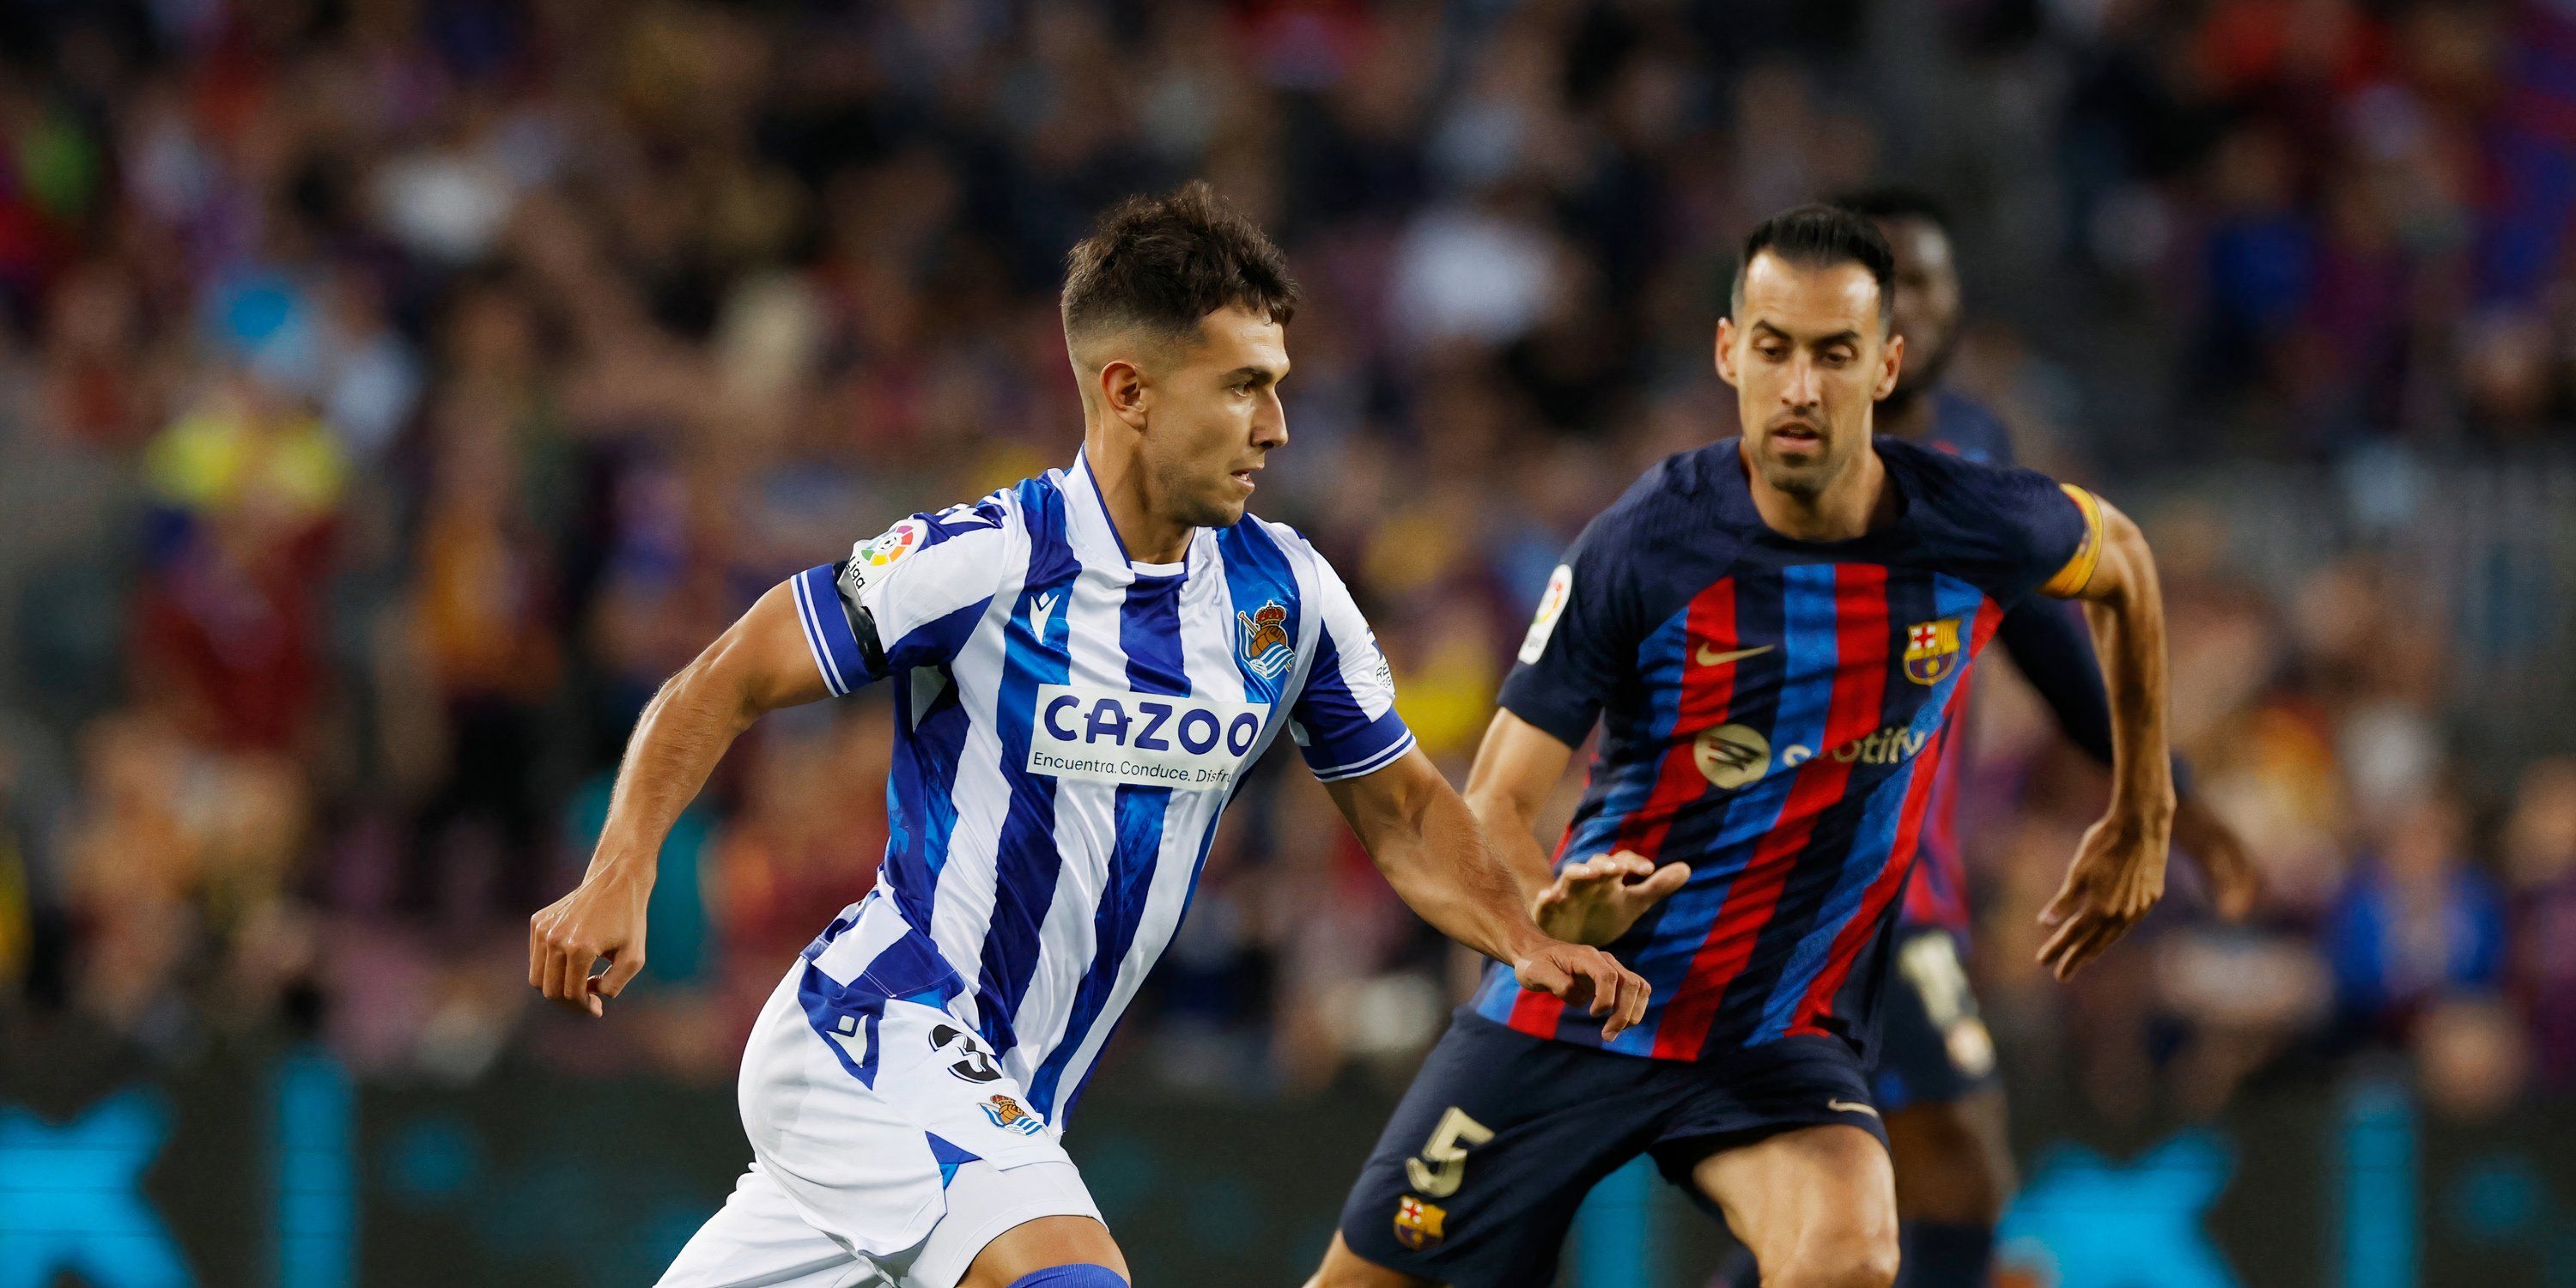 Zubimendi in action for Real Sociedad